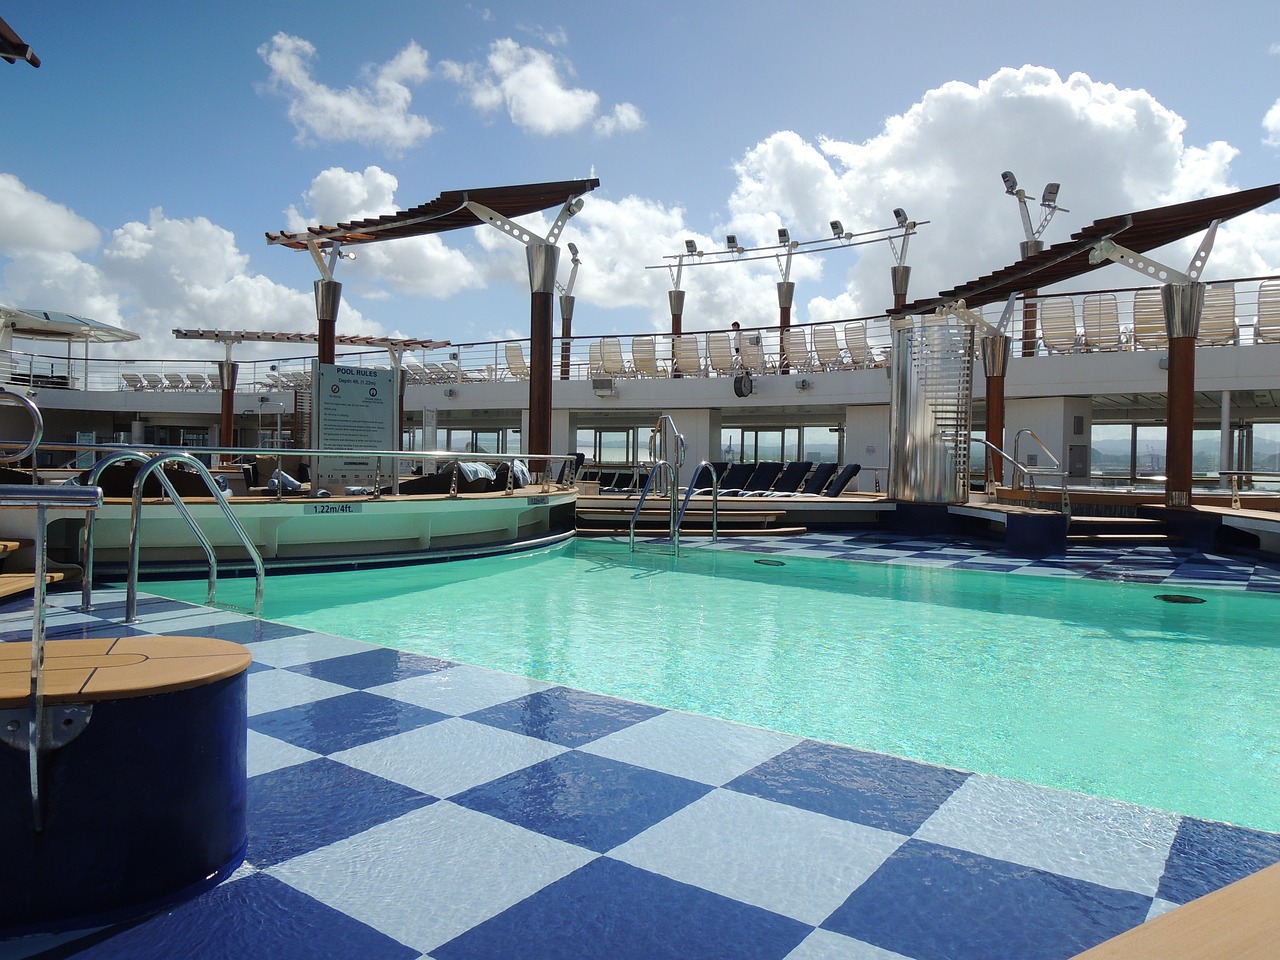 Pool on a Celebrity cruise ship